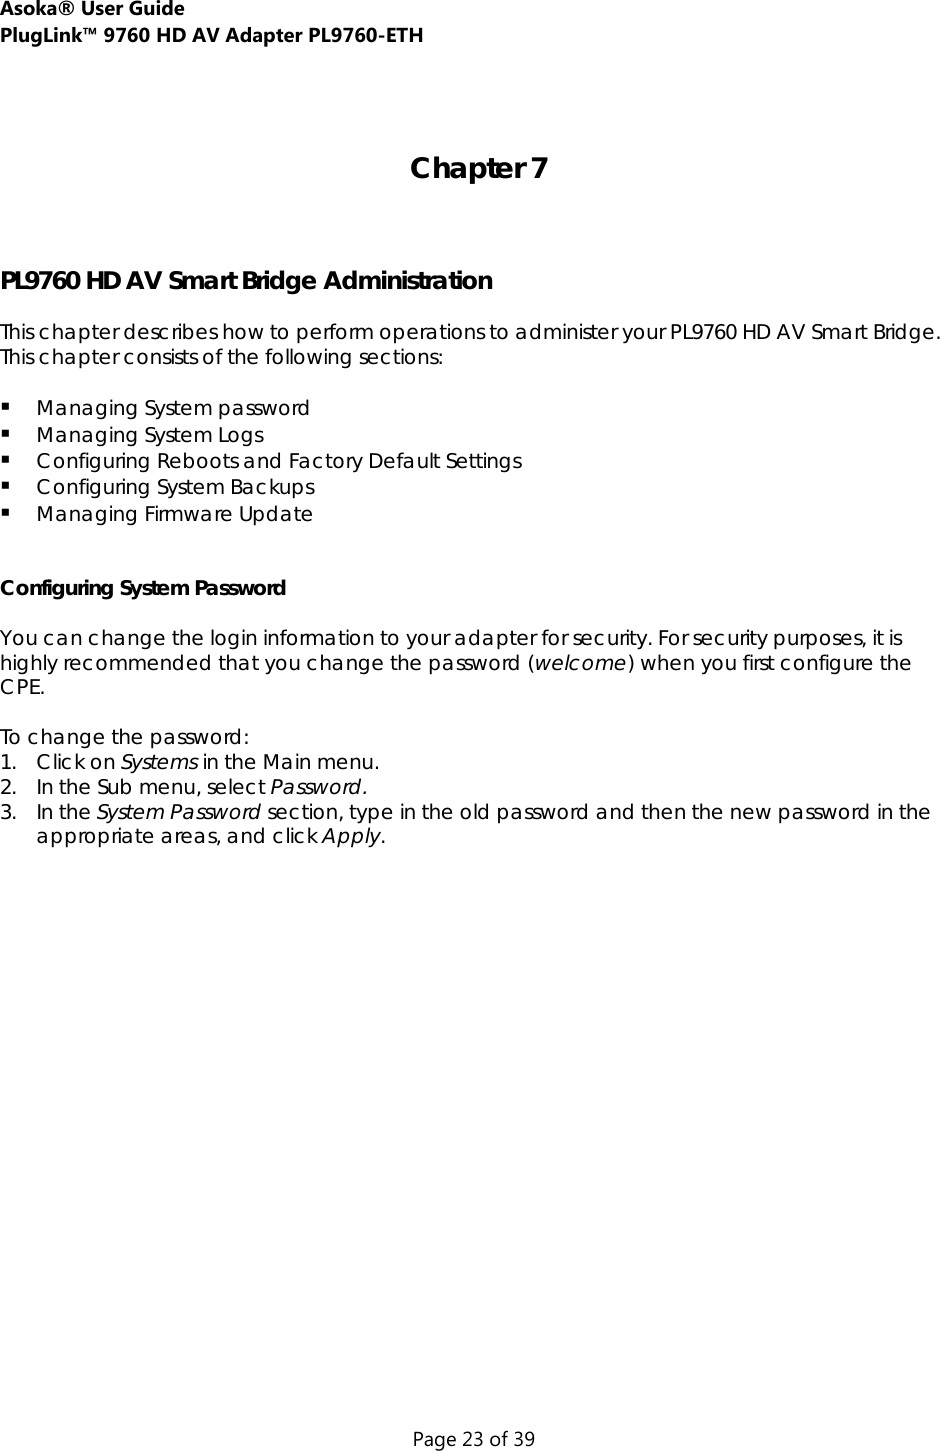 Asoka® User Guide  PlugLink™ 9760 HD AV Adapter PL9760-ETH Page 23 of 39   Chapter 7    PL9760 HD AV Smart Bridge Administration  This chapter describes how to perform operations to administer your PL9760 HD AV Smart Bridge. This chapter consists of the following sections:   Managing System password  Managing System Logs  Configuring Reboots and Factory Default Settings  Configuring System Backups  Managing Firmware Update   Configuring System Password  You can change the login information to your adapter for security. For security purposes, it is highly recommended that you change the password (welcome) when you first configure the CPE.  To change the password: 1. Click on Systems in the Main menu. 2. In the Sub menu, select Password. 3. In the System Password section, type in the old password and then the new password in the appropriate areas, and click Apply.   